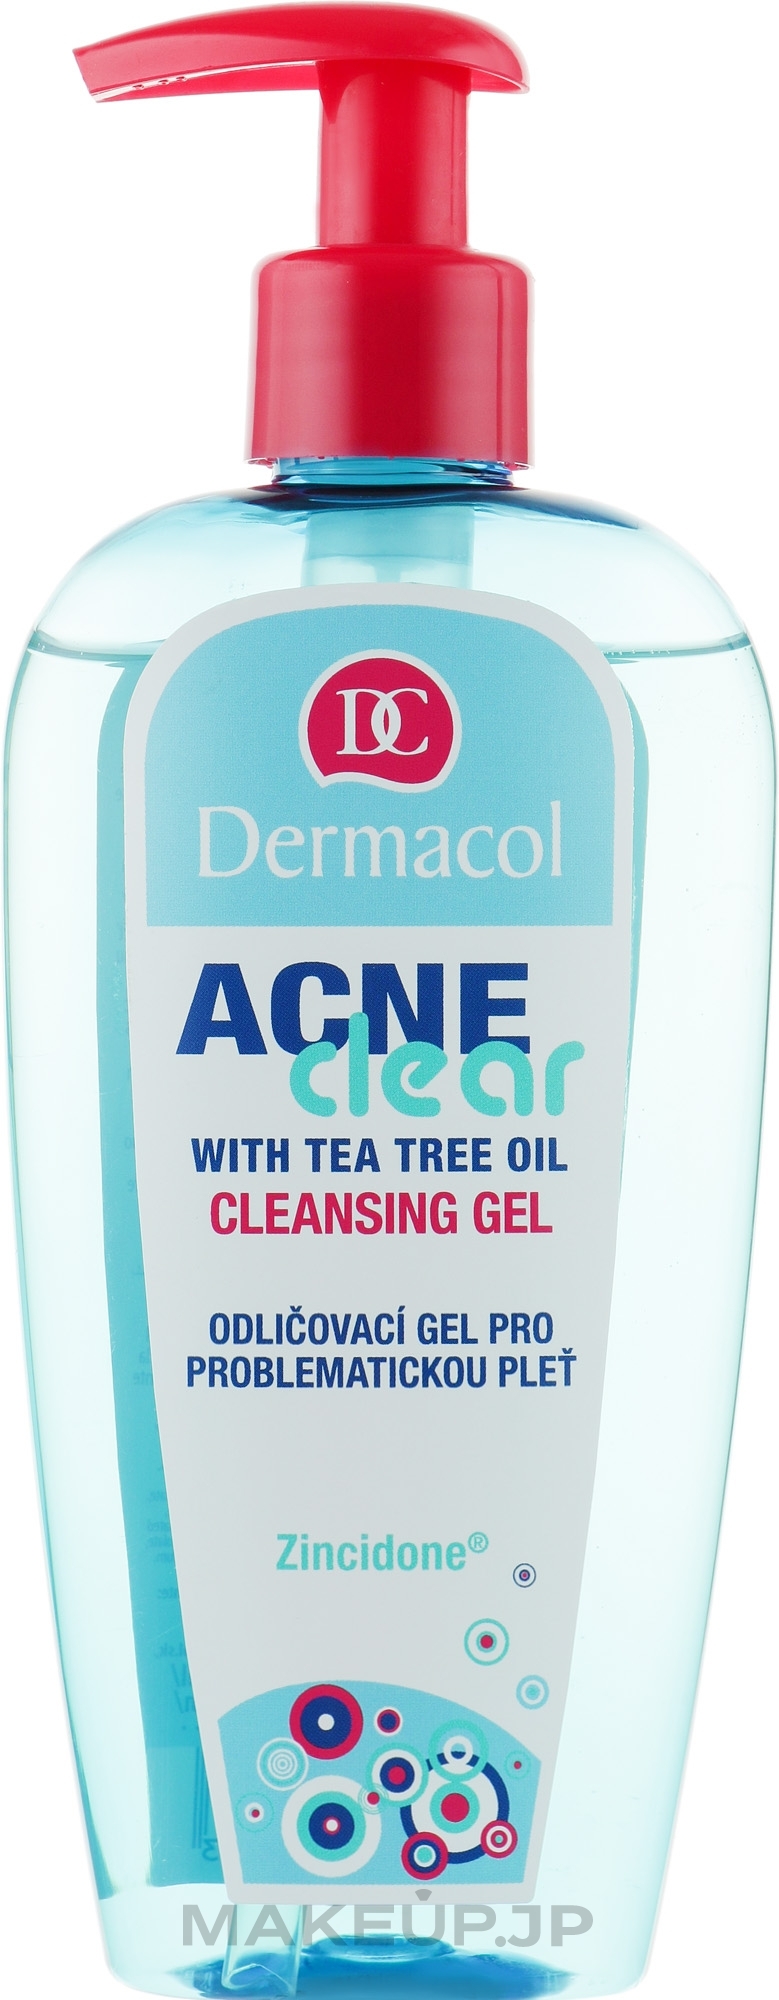 Makeup Removal and Cleansing Gel for Problm Skin - Dermacol Acne Clear Make-Up Removal & Cleansing Gel — photo 200 ml